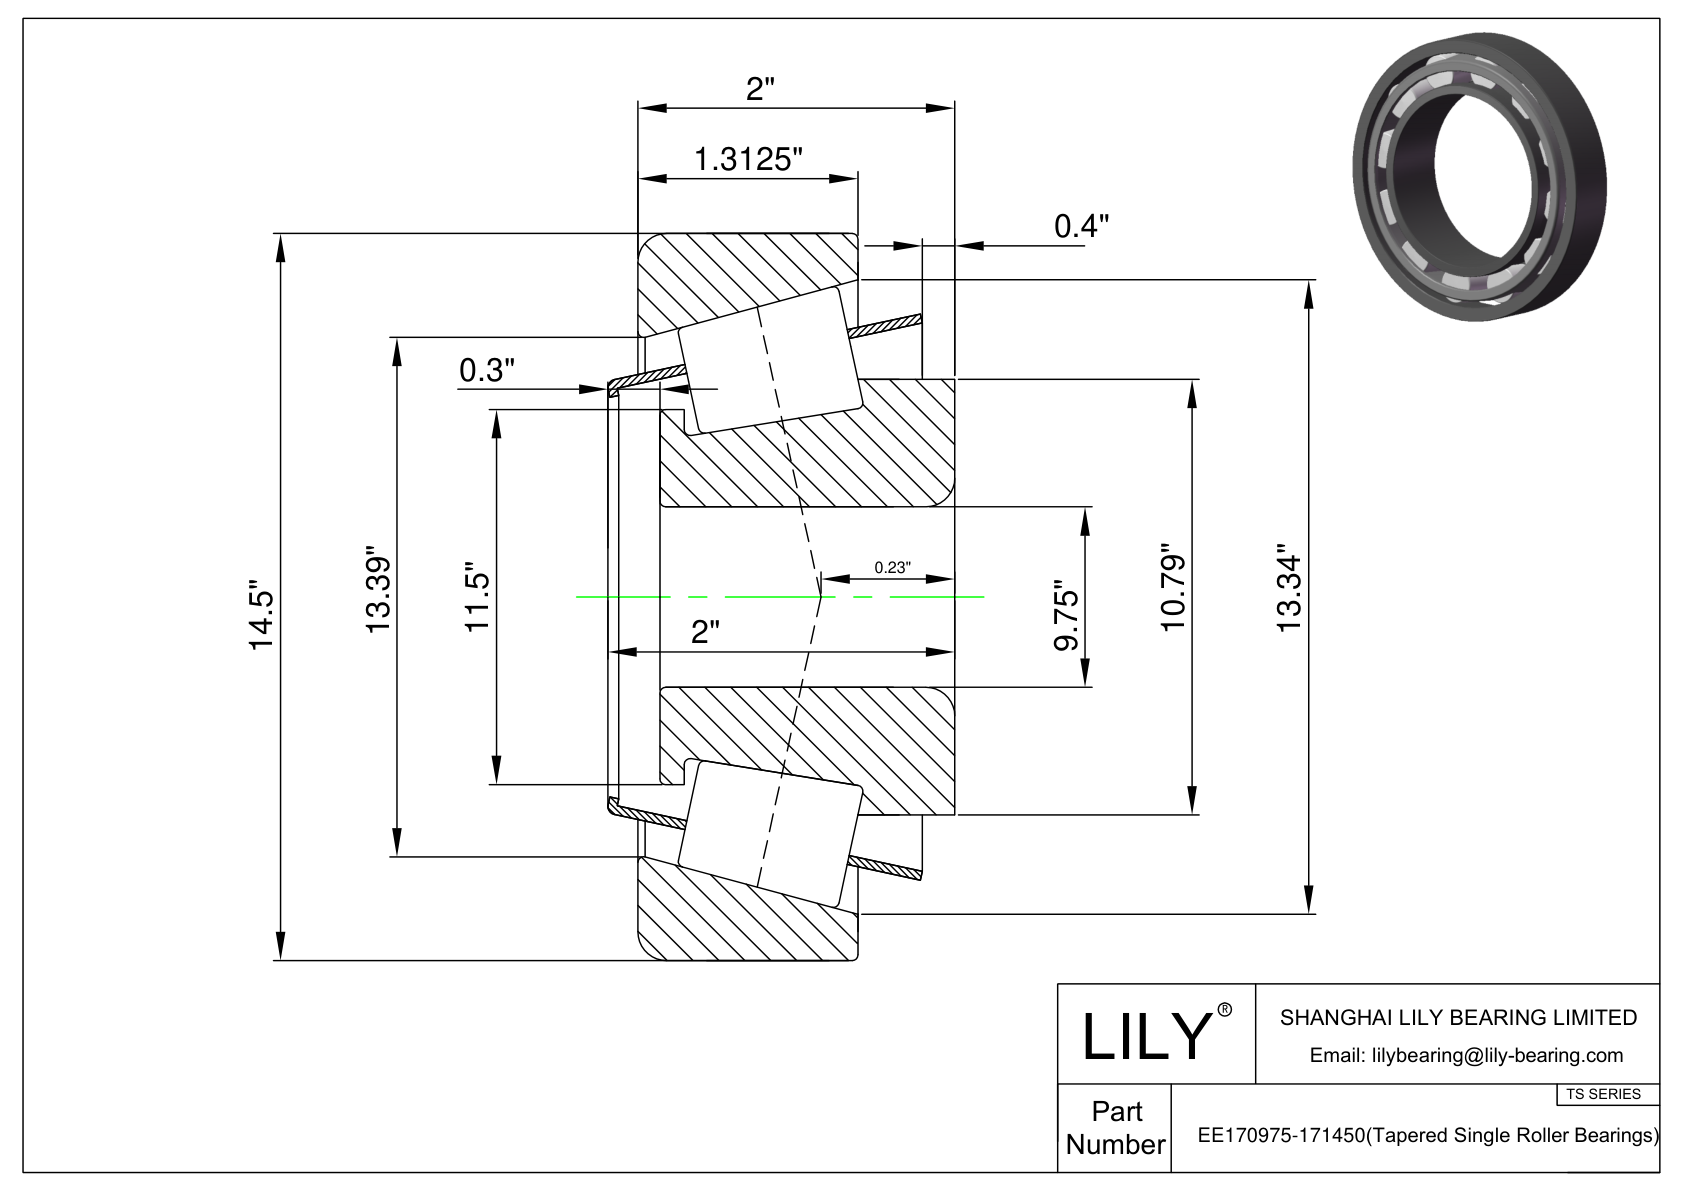 EE170975-171450 TS (Tapered Single Roller Bearings) (Imperial) cad drawing